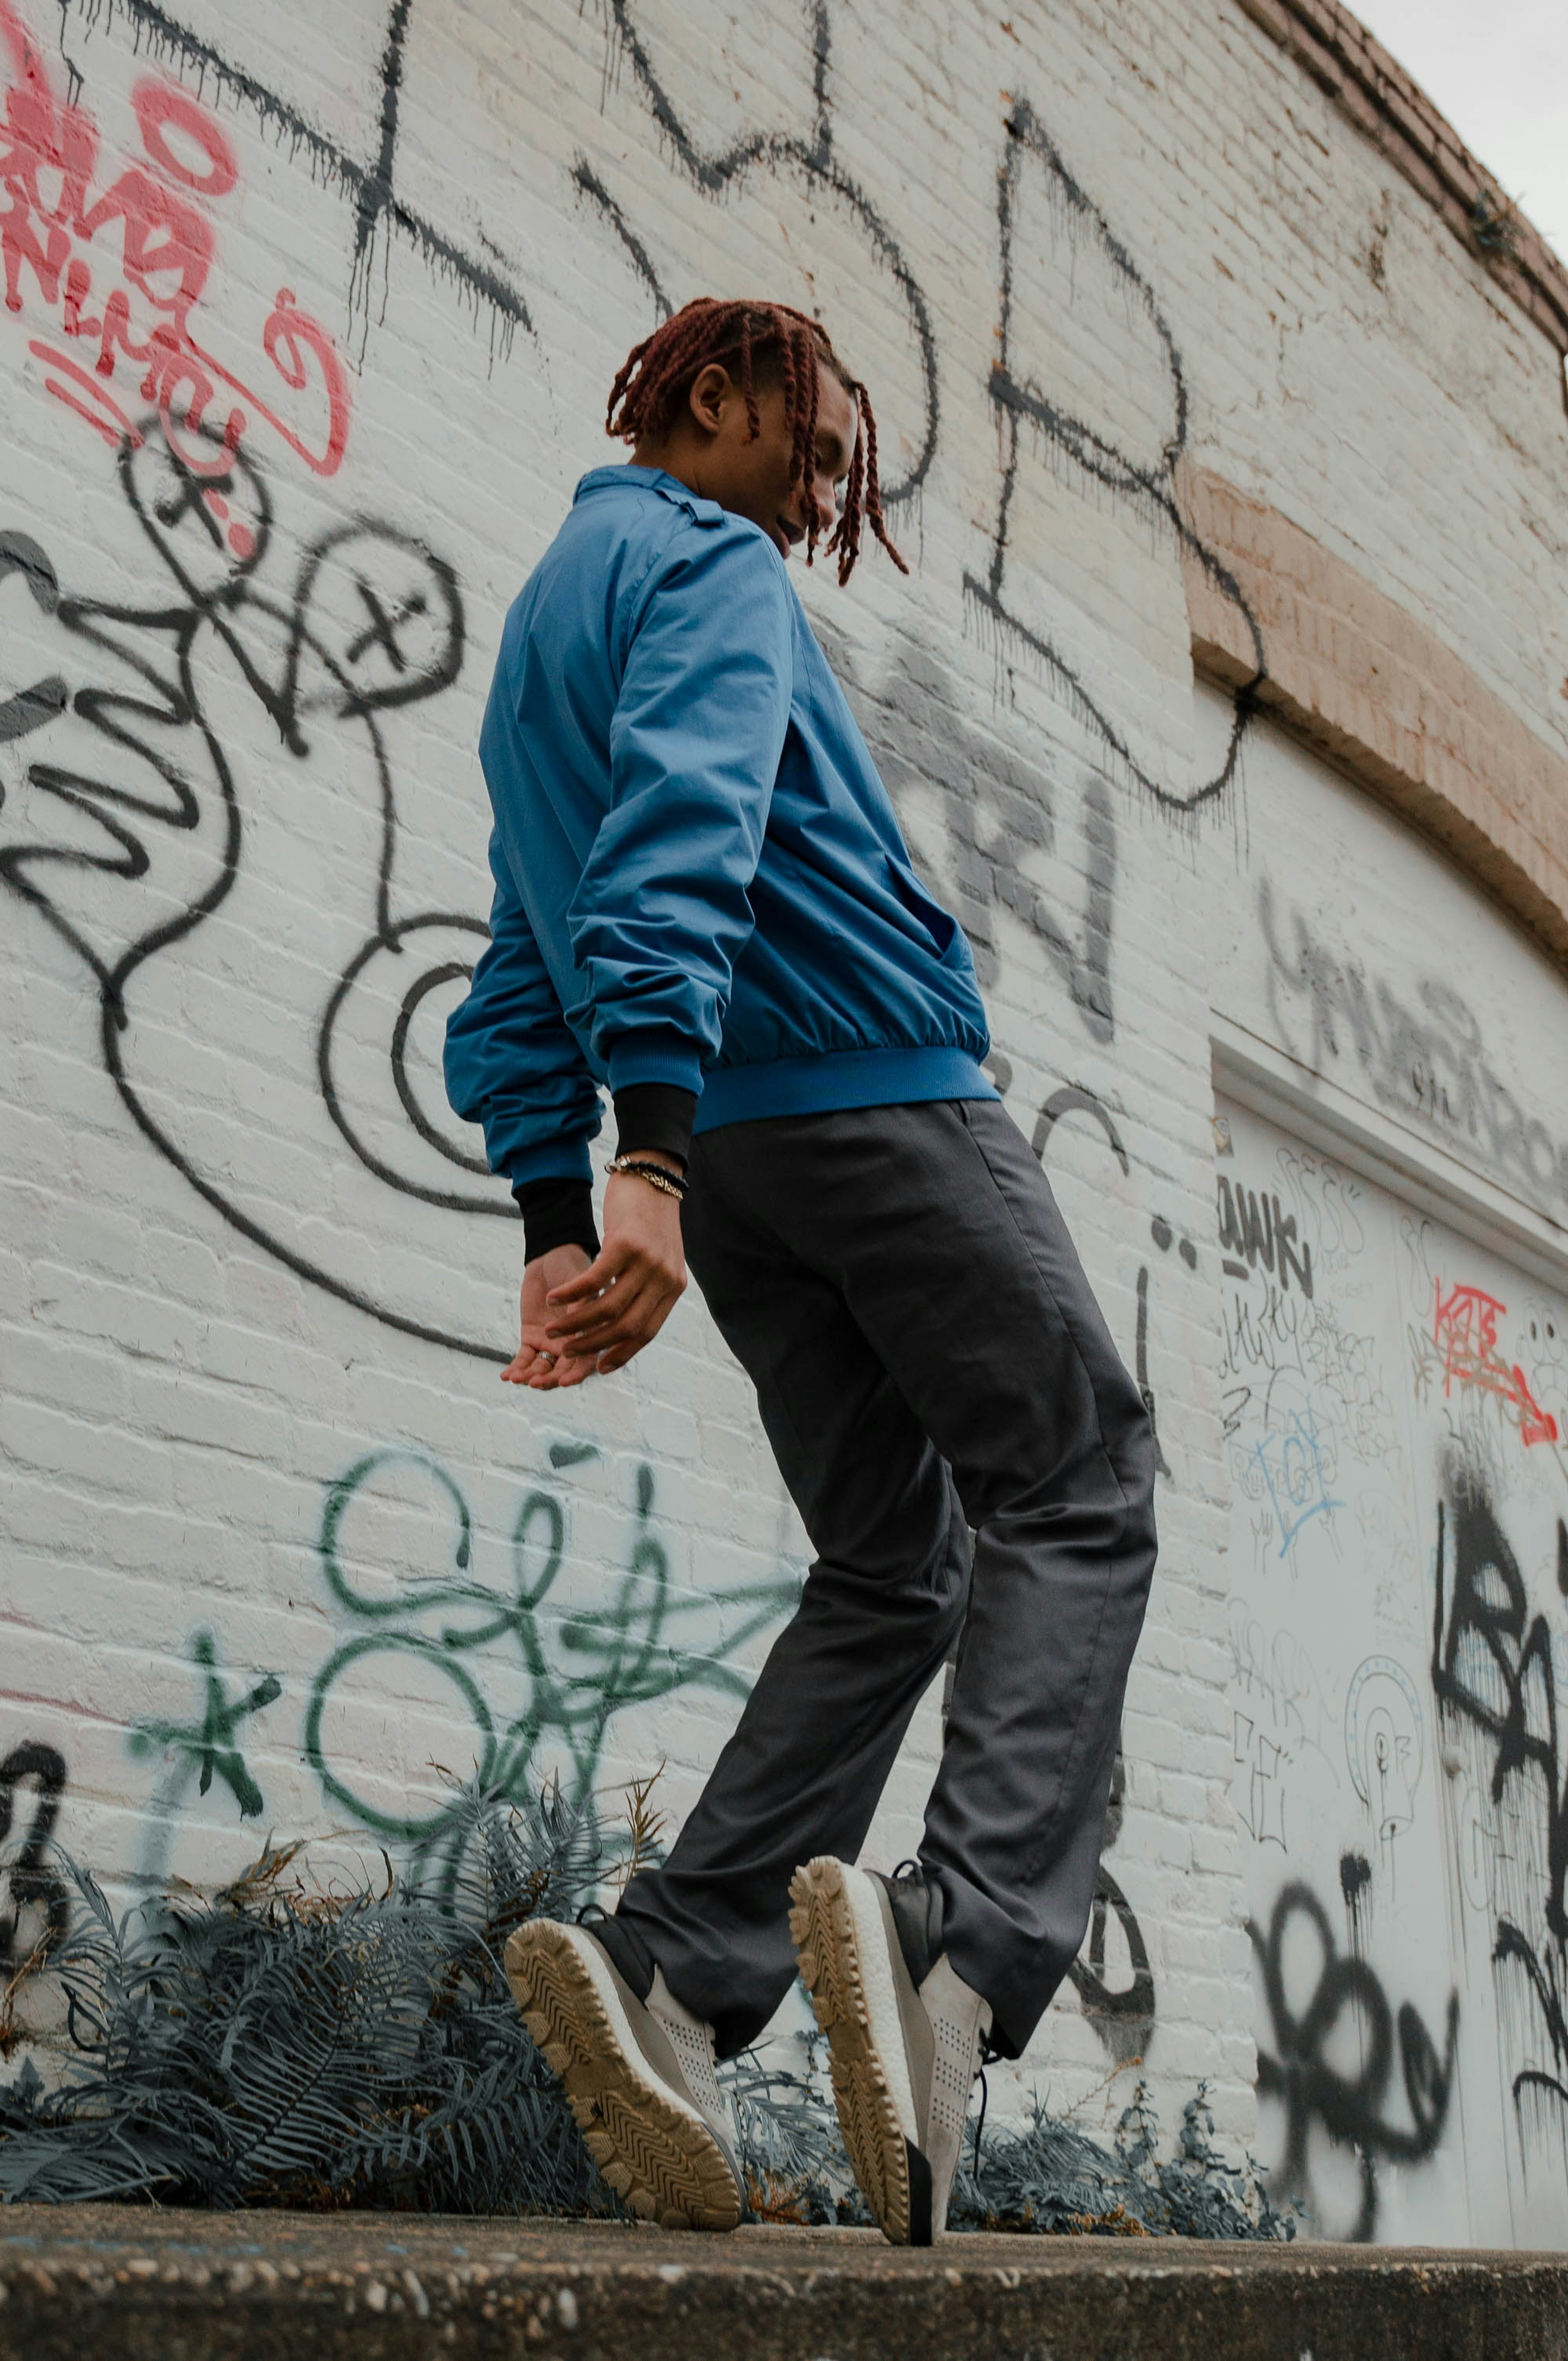 man dancing in front of graffiti background